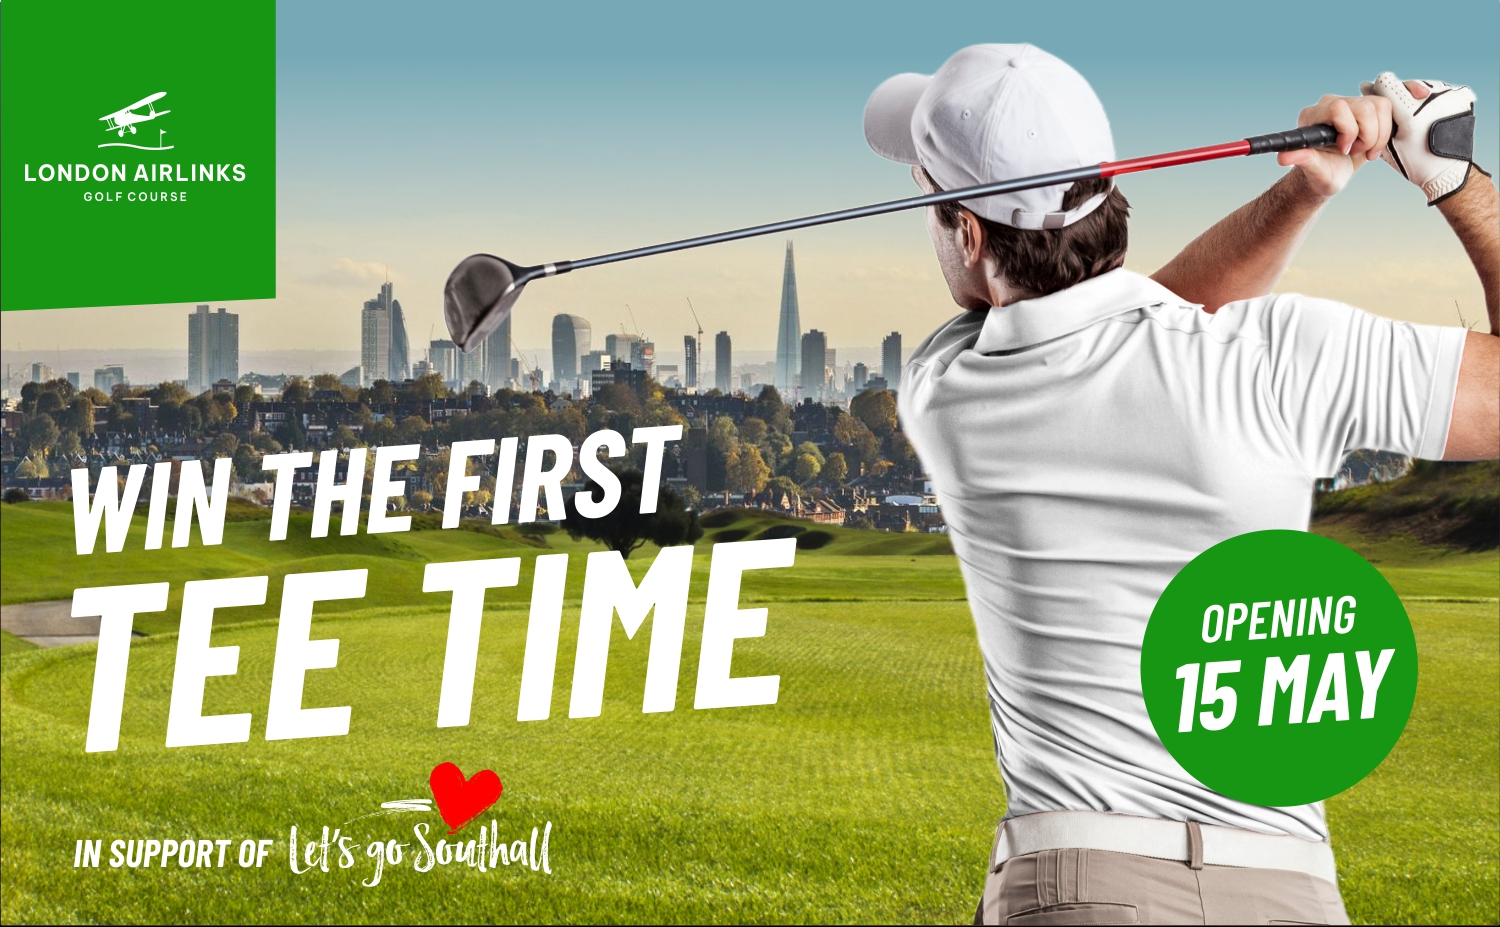 Win the first tee time at London Airlinks Golf Course!